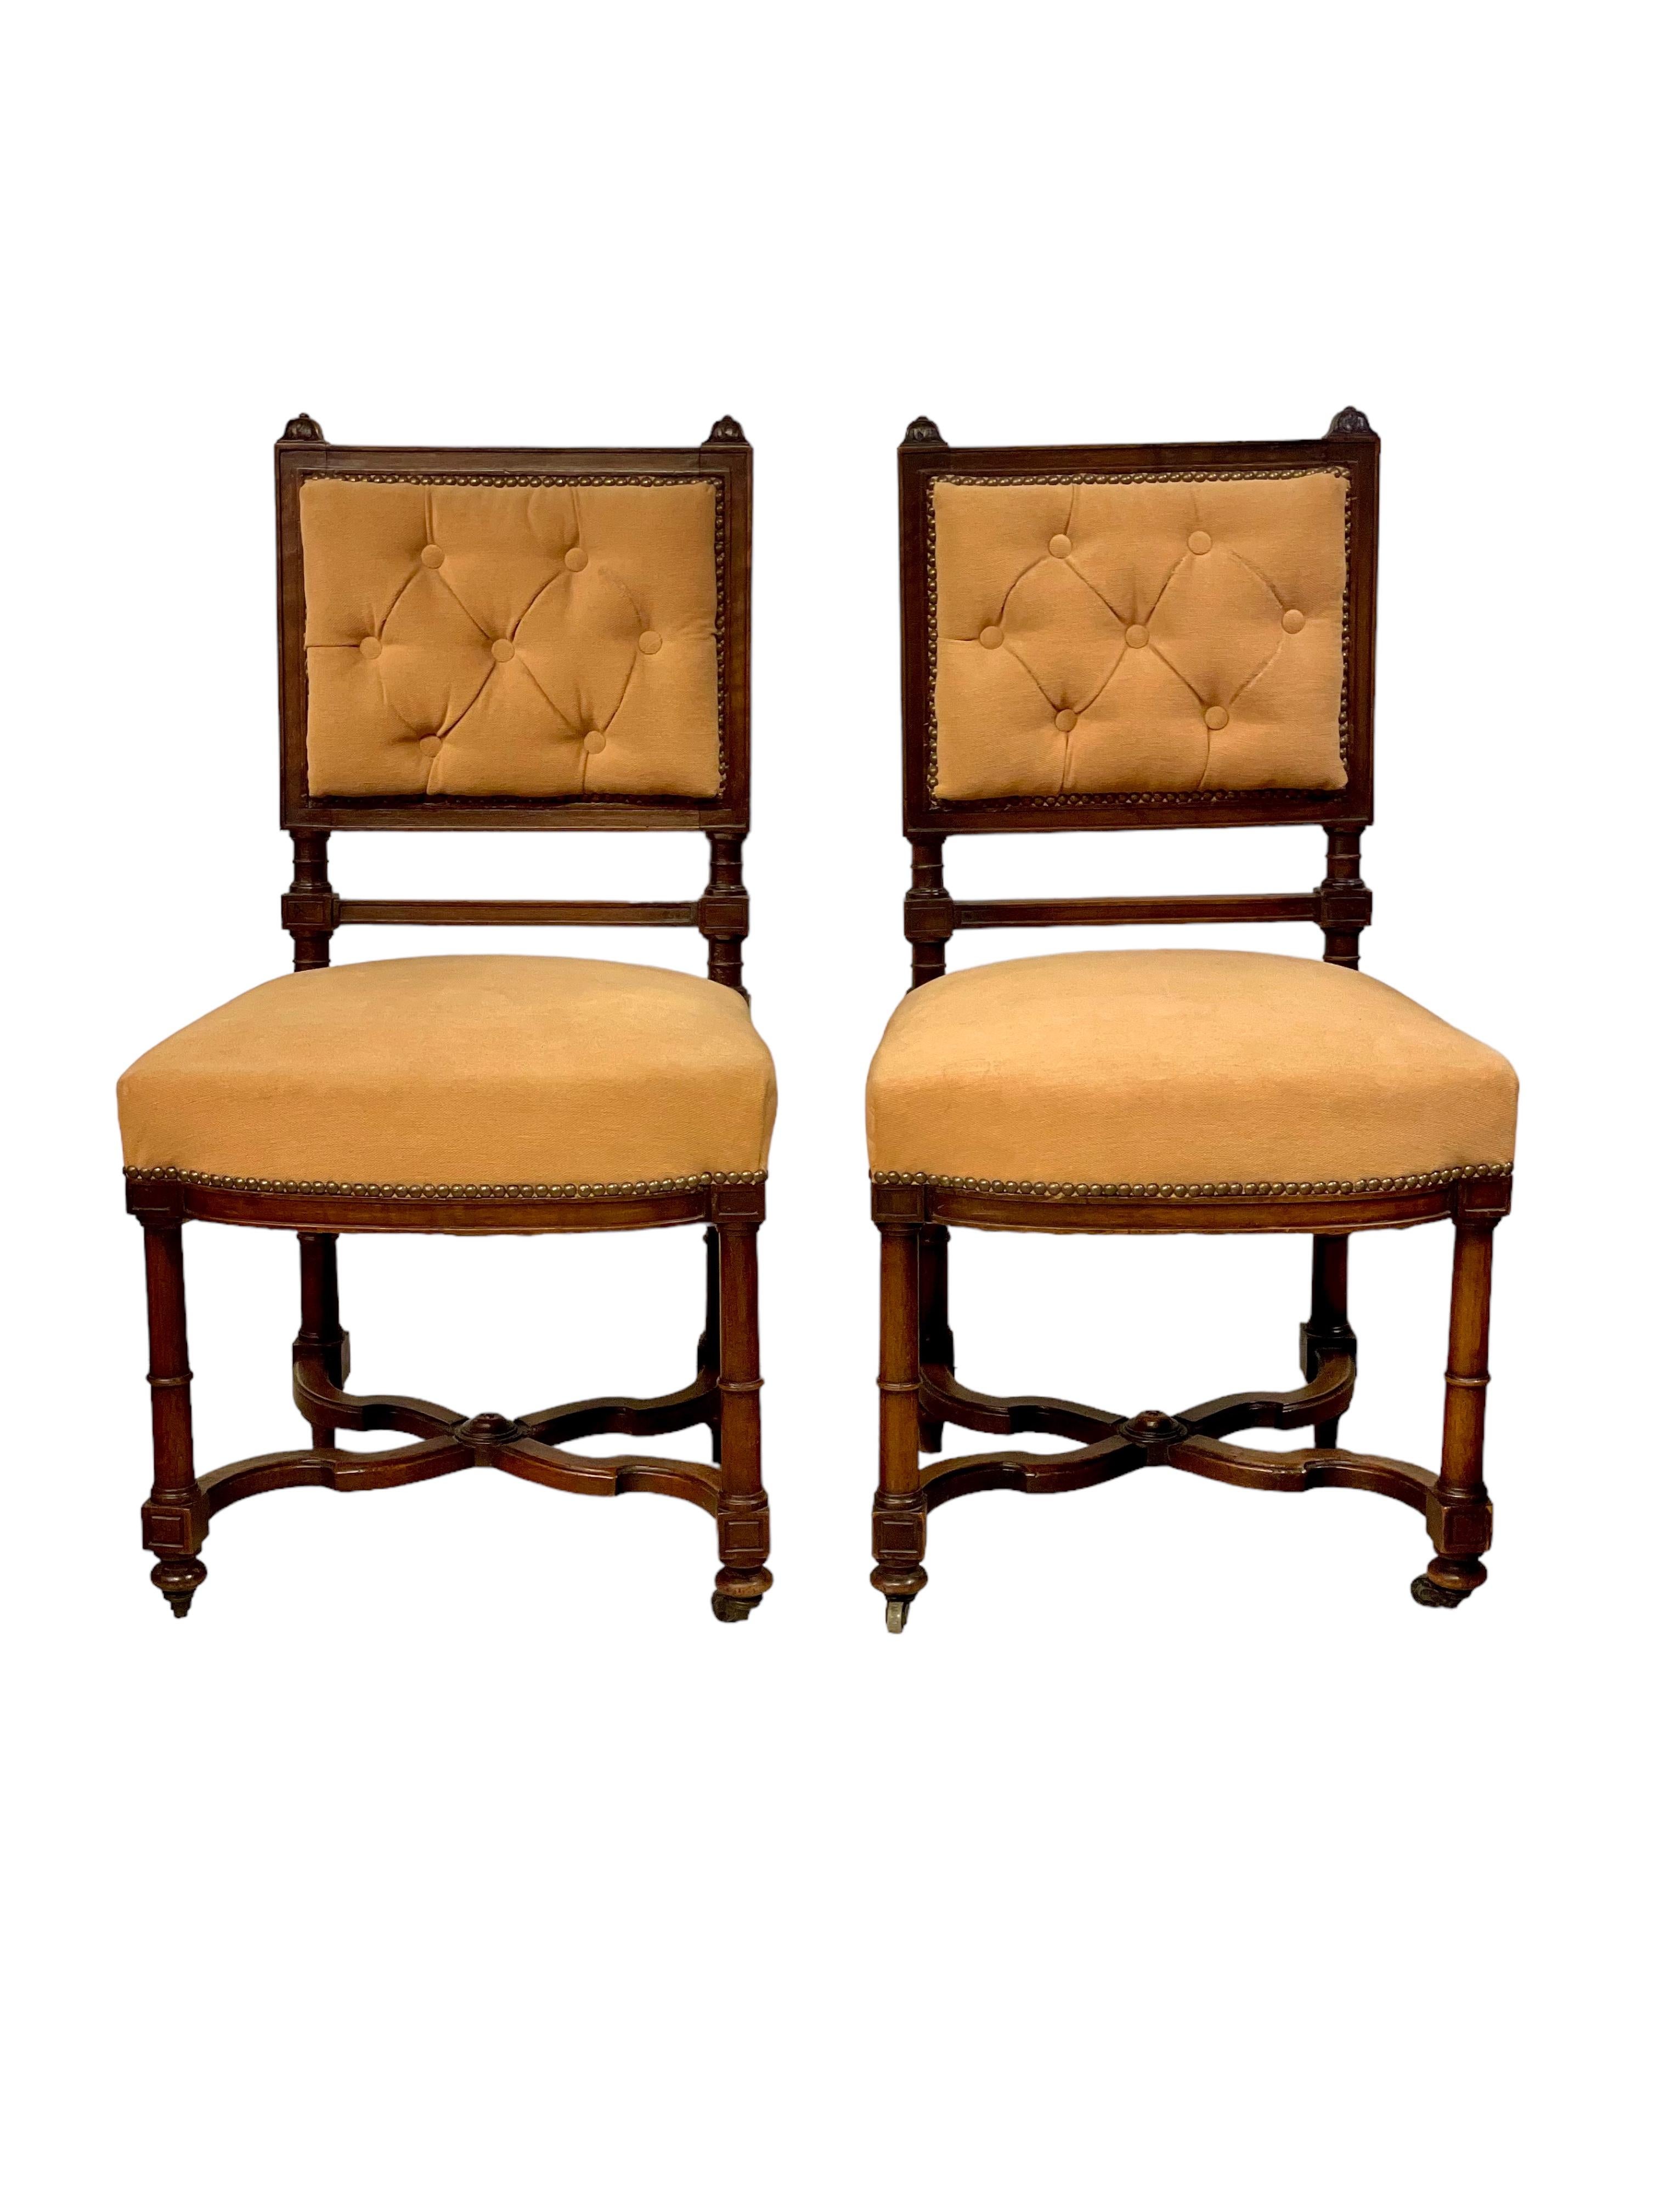 Walnut Set of Five Upholstered Louis XIII style Dining Chairs, 19th Century For Sale